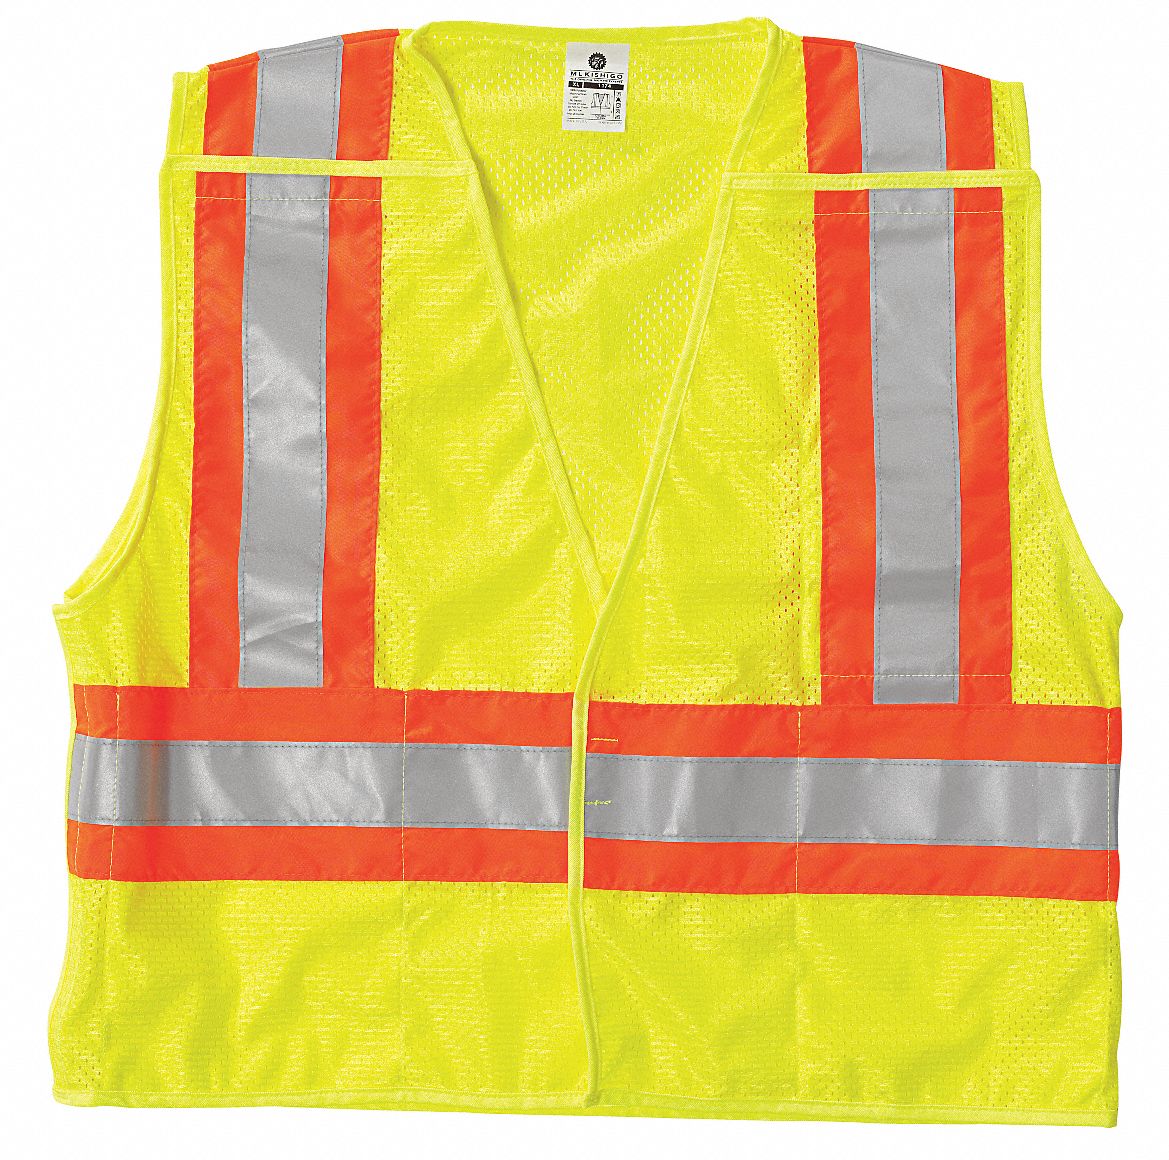 10 PACK NEON YELLOW SAFETY TRAFFIC VEST W// REFLECTIVE STRIPS SIZE 3XL